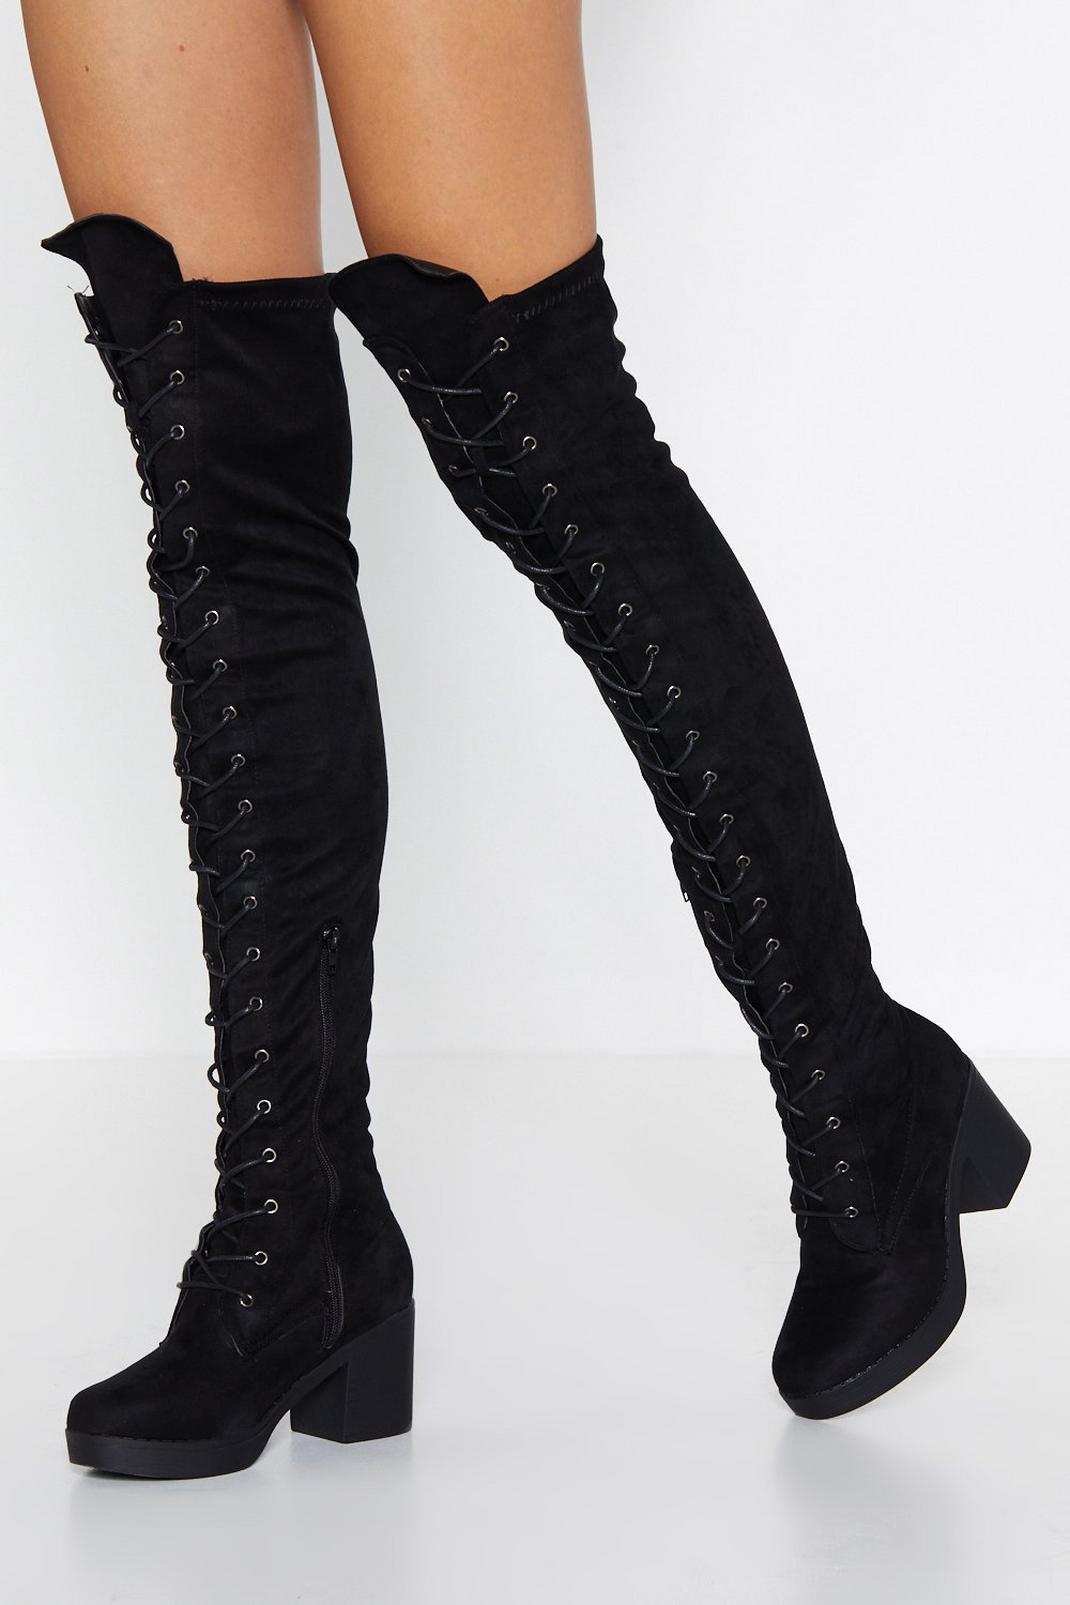 Lace Up Over The Knee Boots Nasty Gal